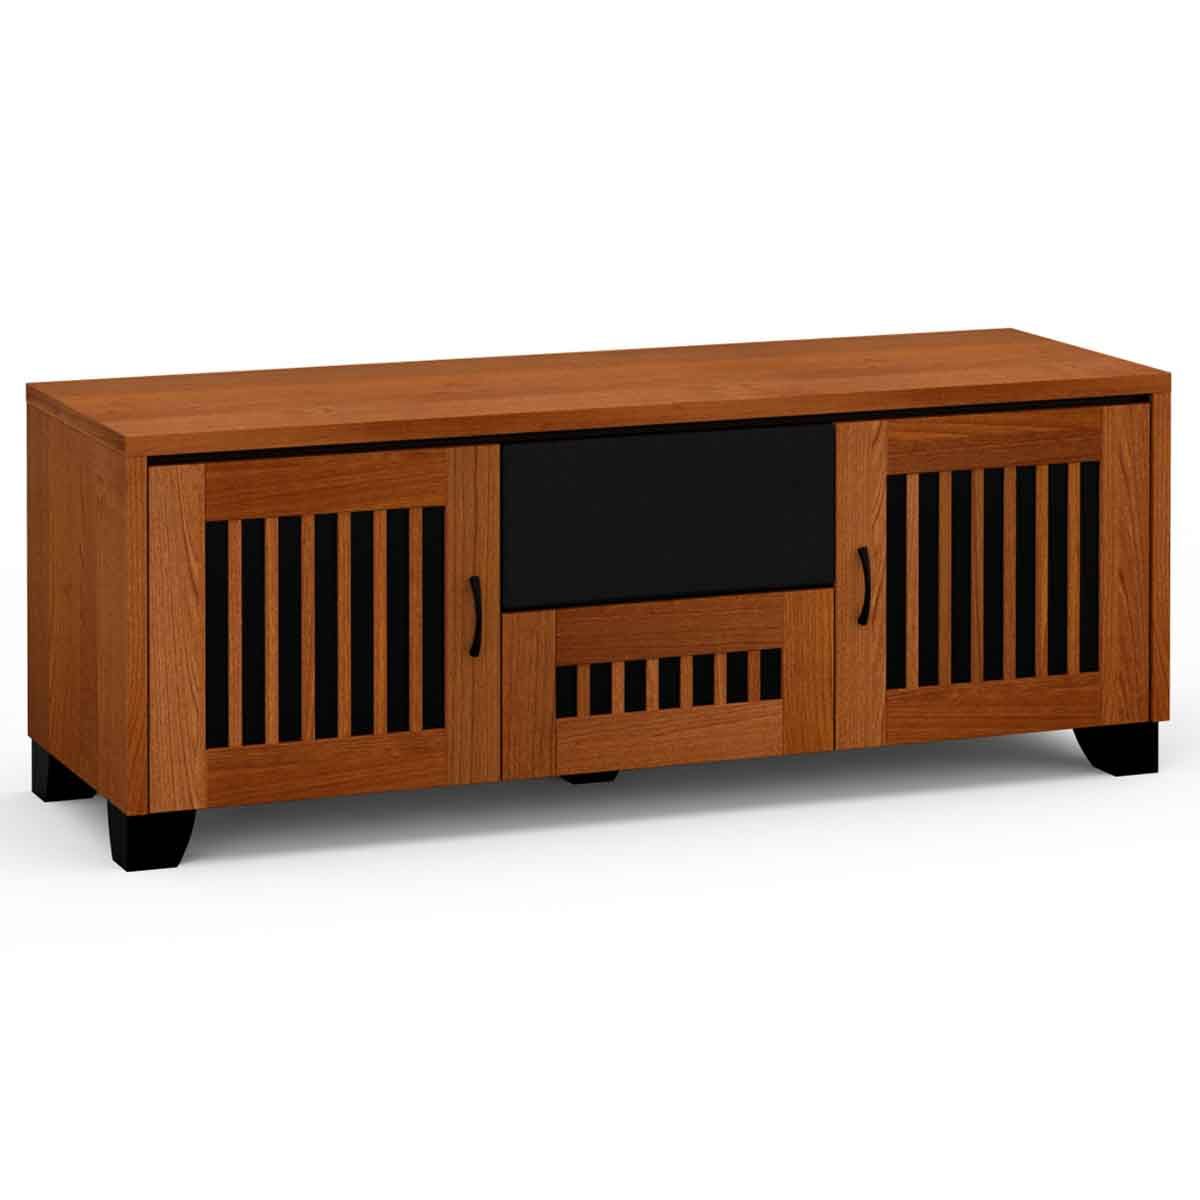 Salamander Designs Sonoma 236  Triple-Width AV Cabinet with Center Speaker Opening - American Cherry- front view